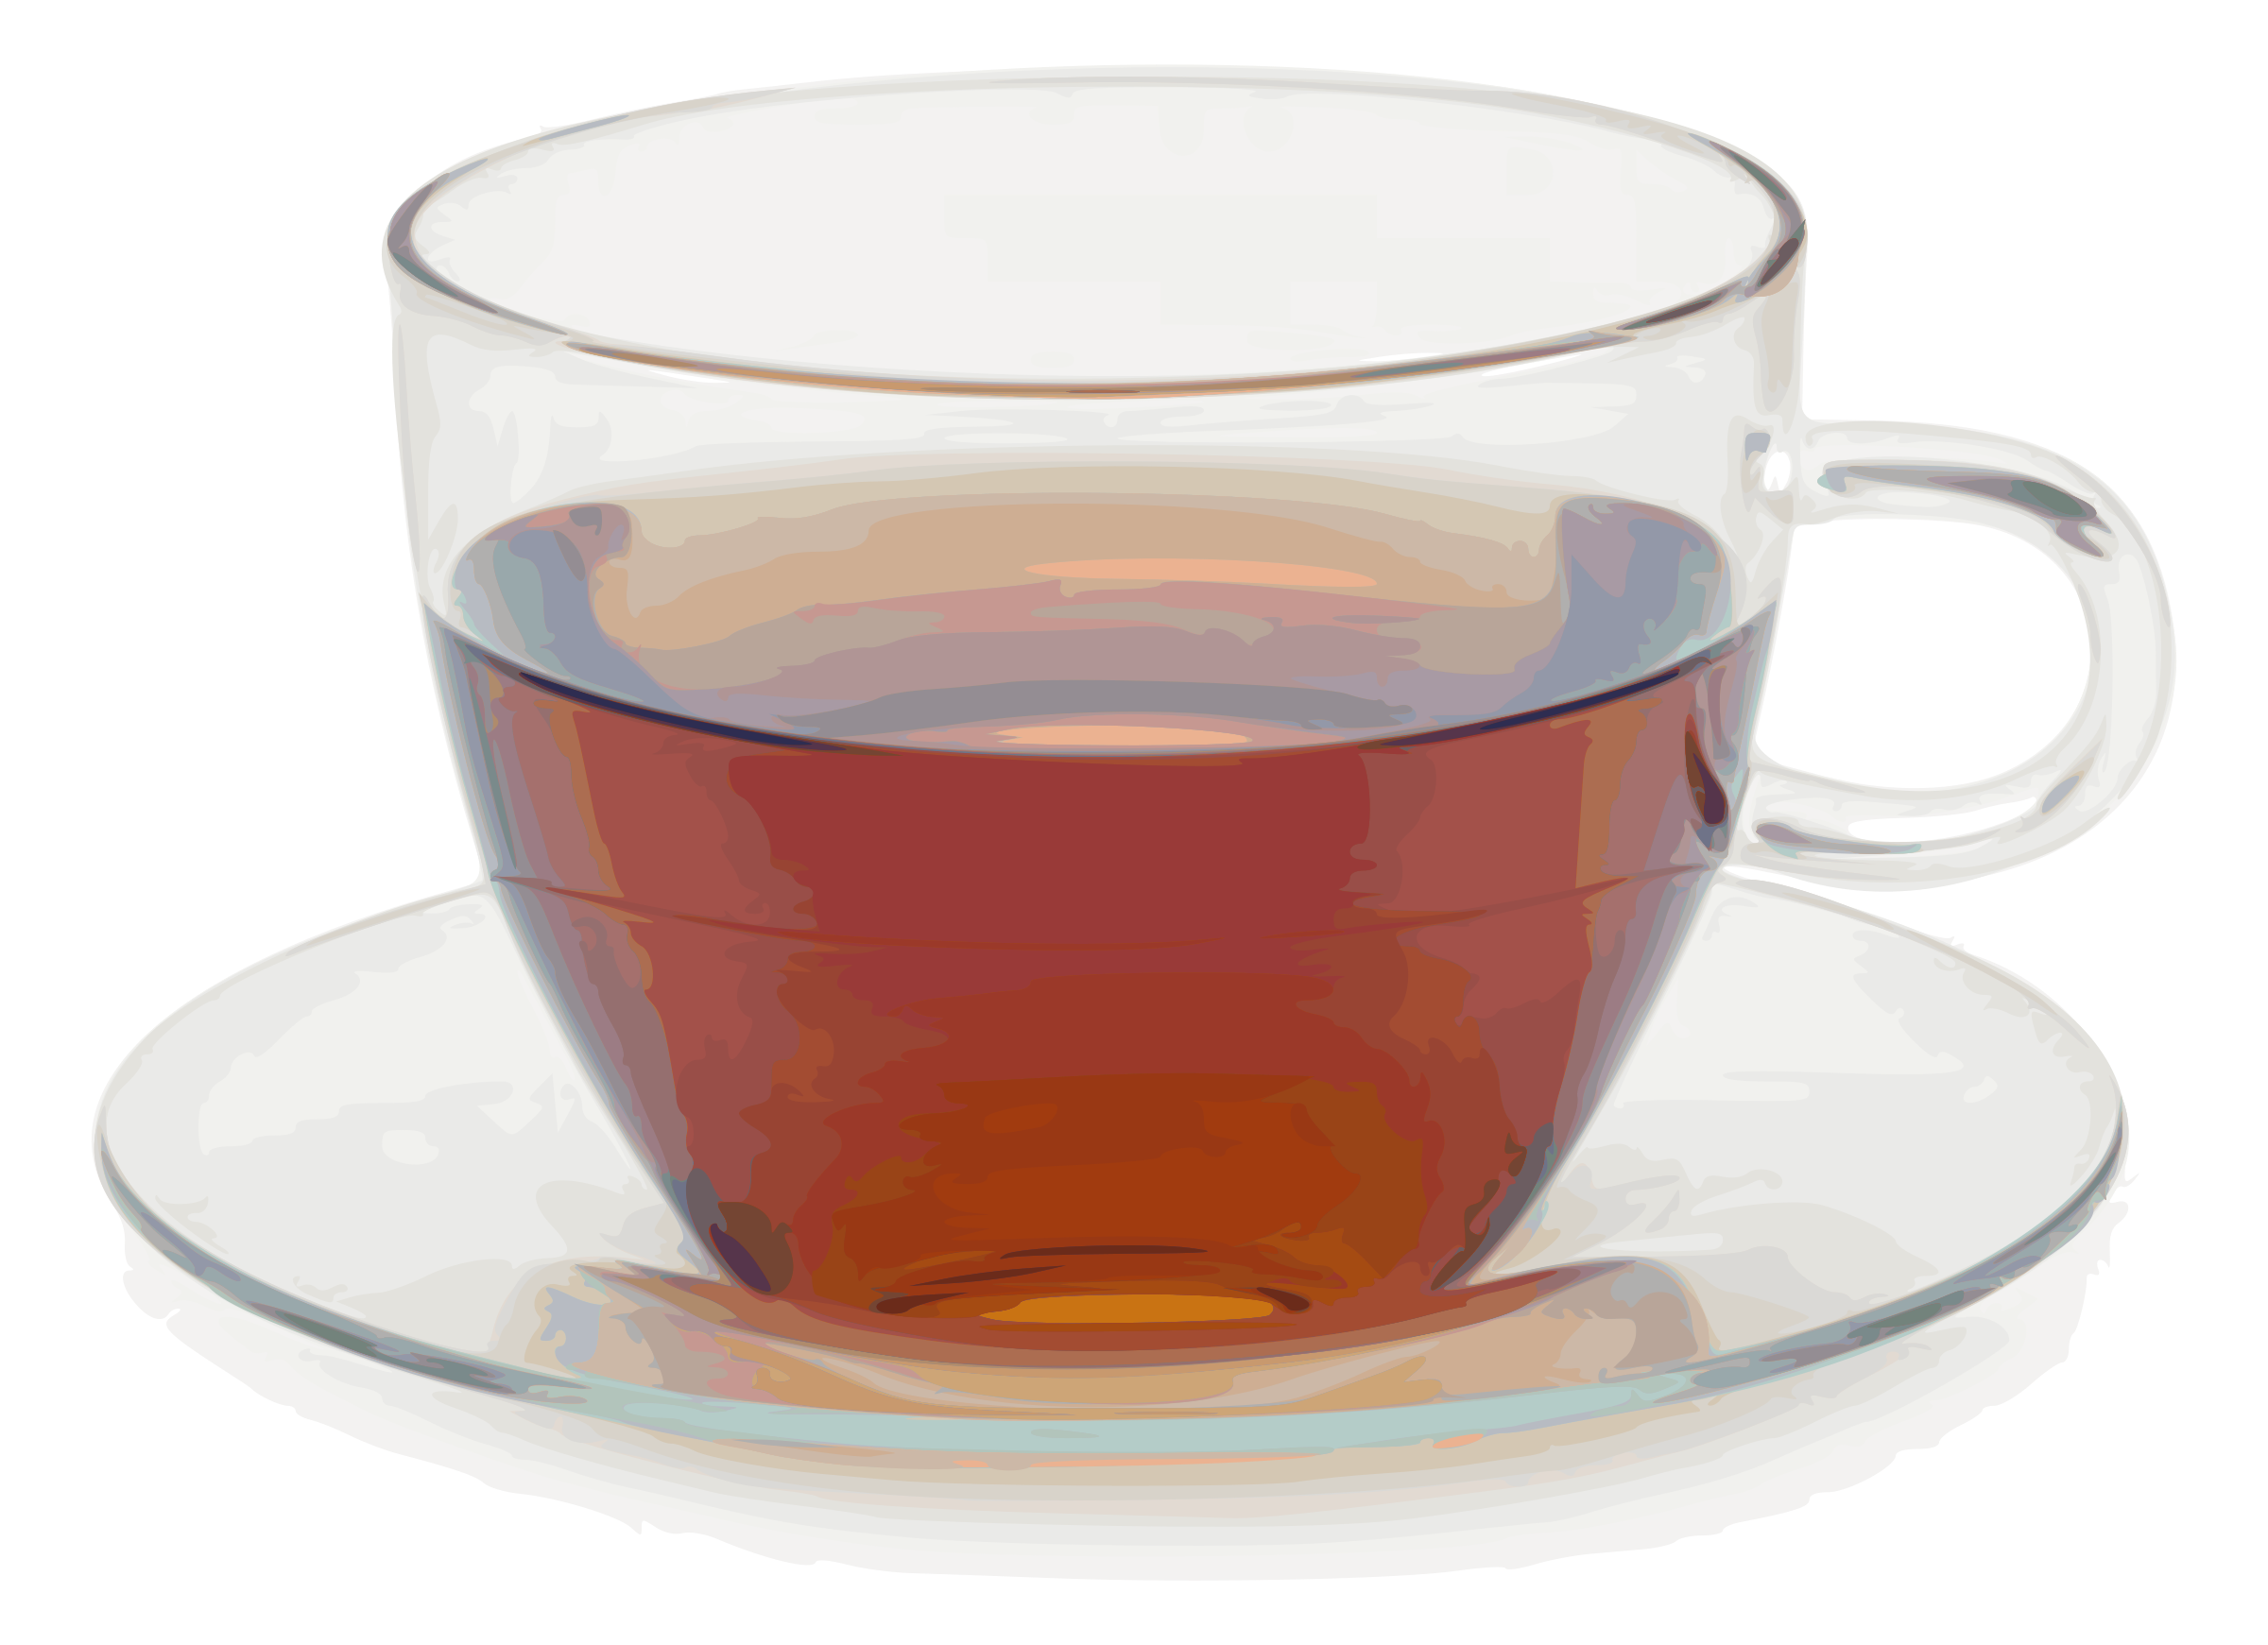 Cup PNG images free download, cup of coffee, cup of tea.